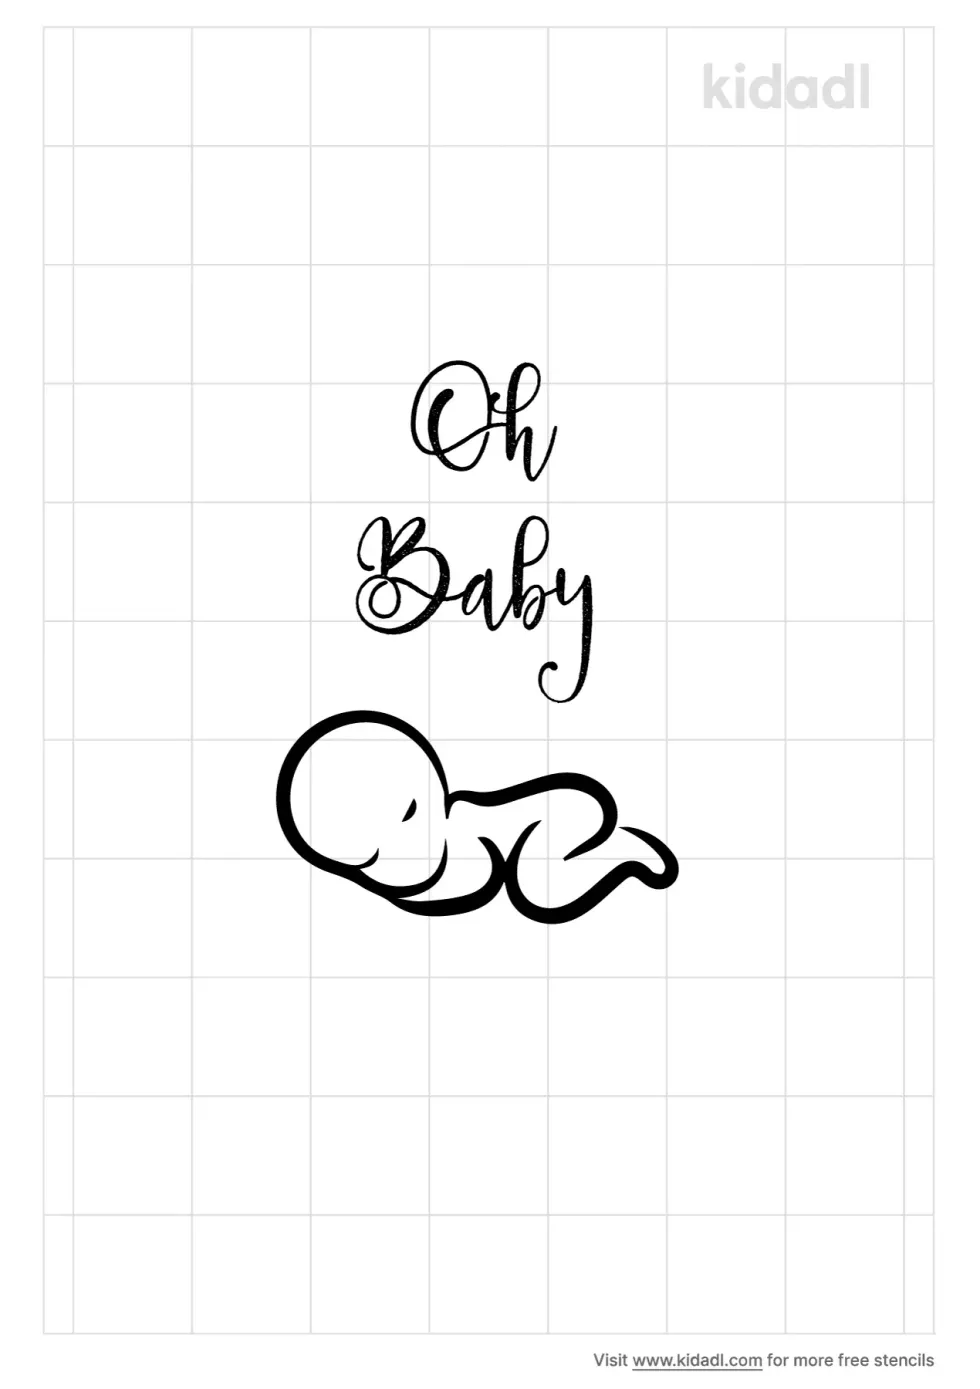 Oh Baby Stencil